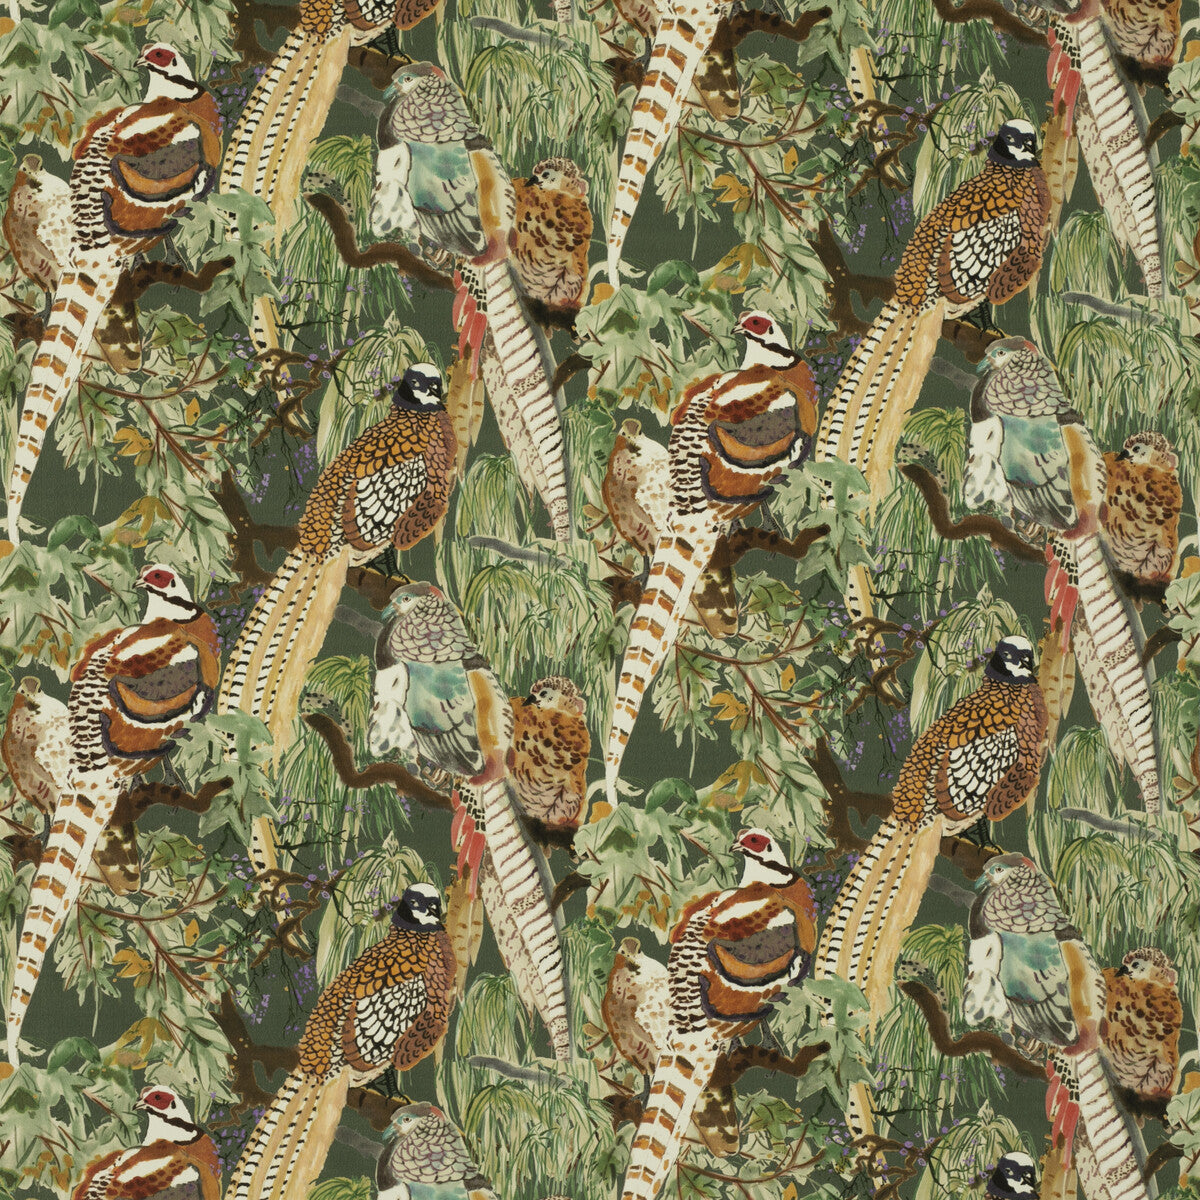 Game Birds Velvet fabric in forest color - pattern FD268.R102.0 - by Mulberry in the Icons Fabrics collection